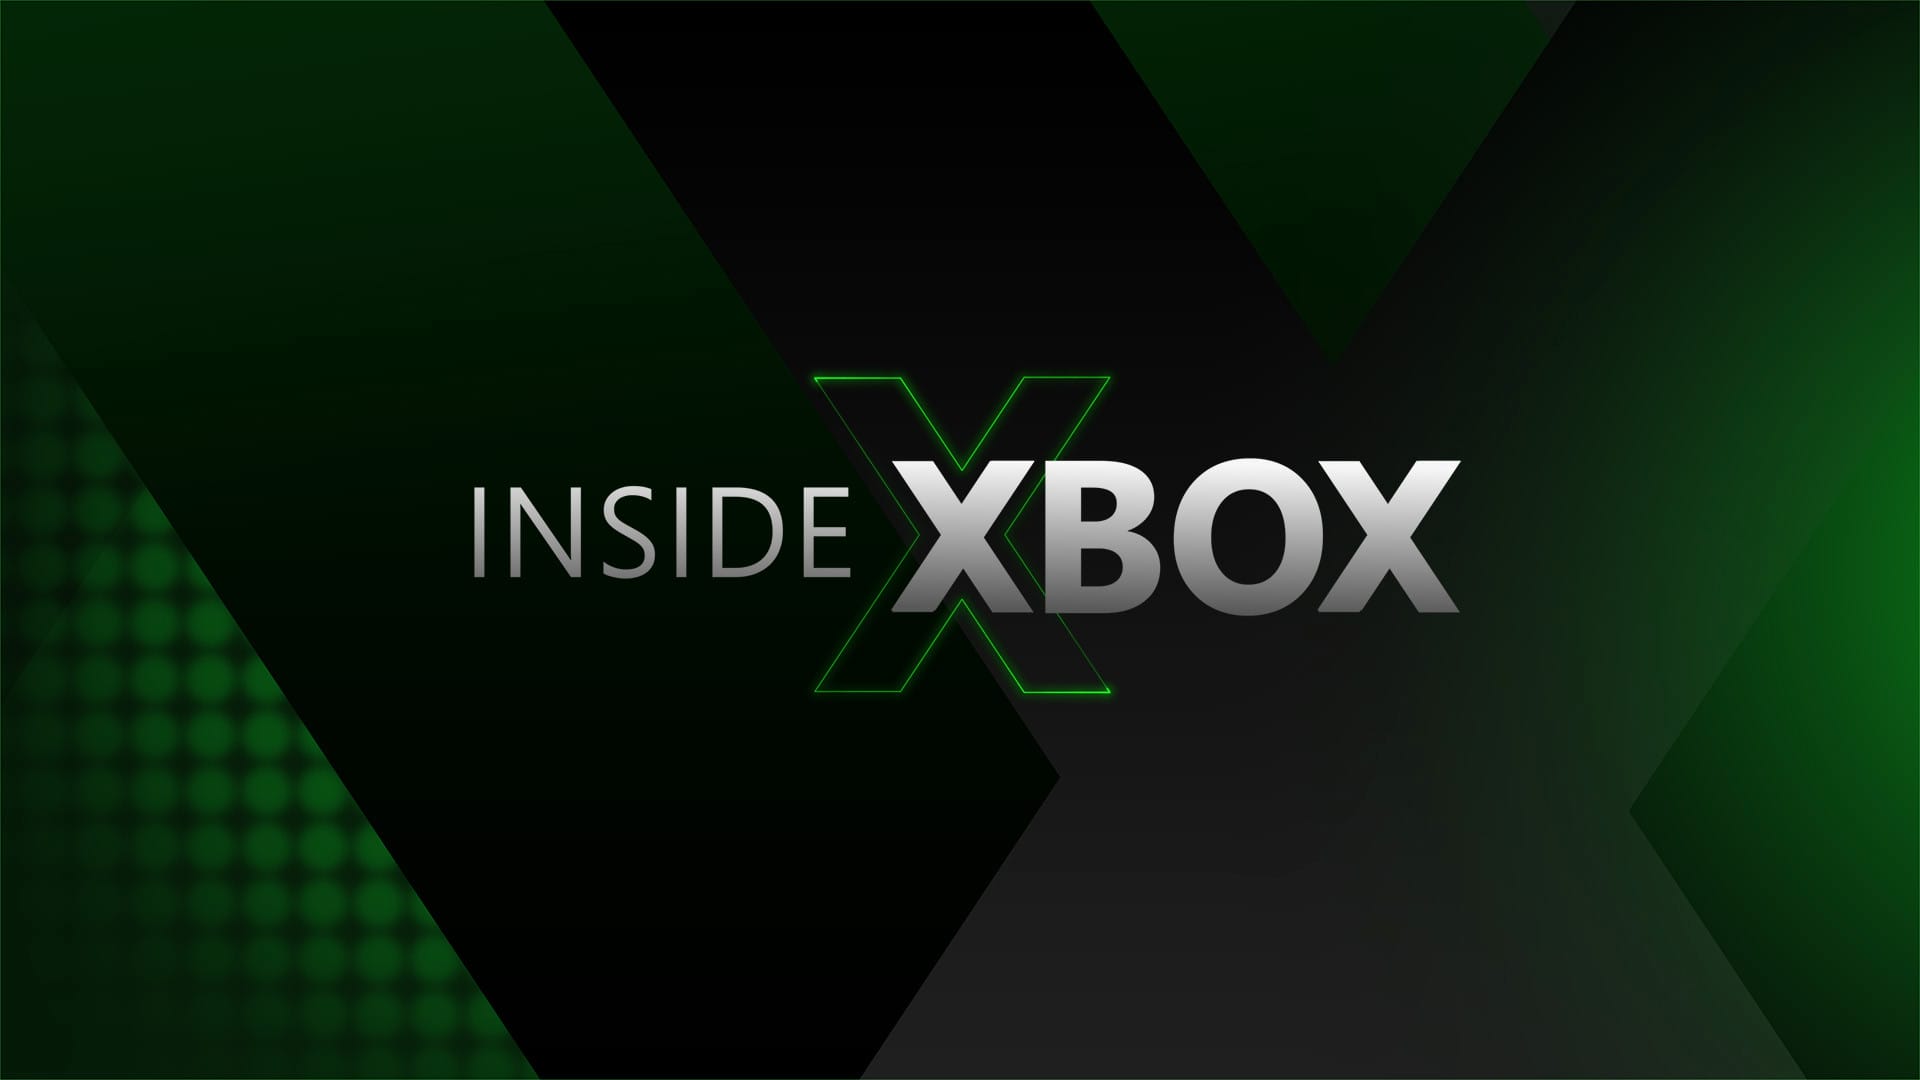 New Unannounced Games To Be Shown in Inside Xbox This Week